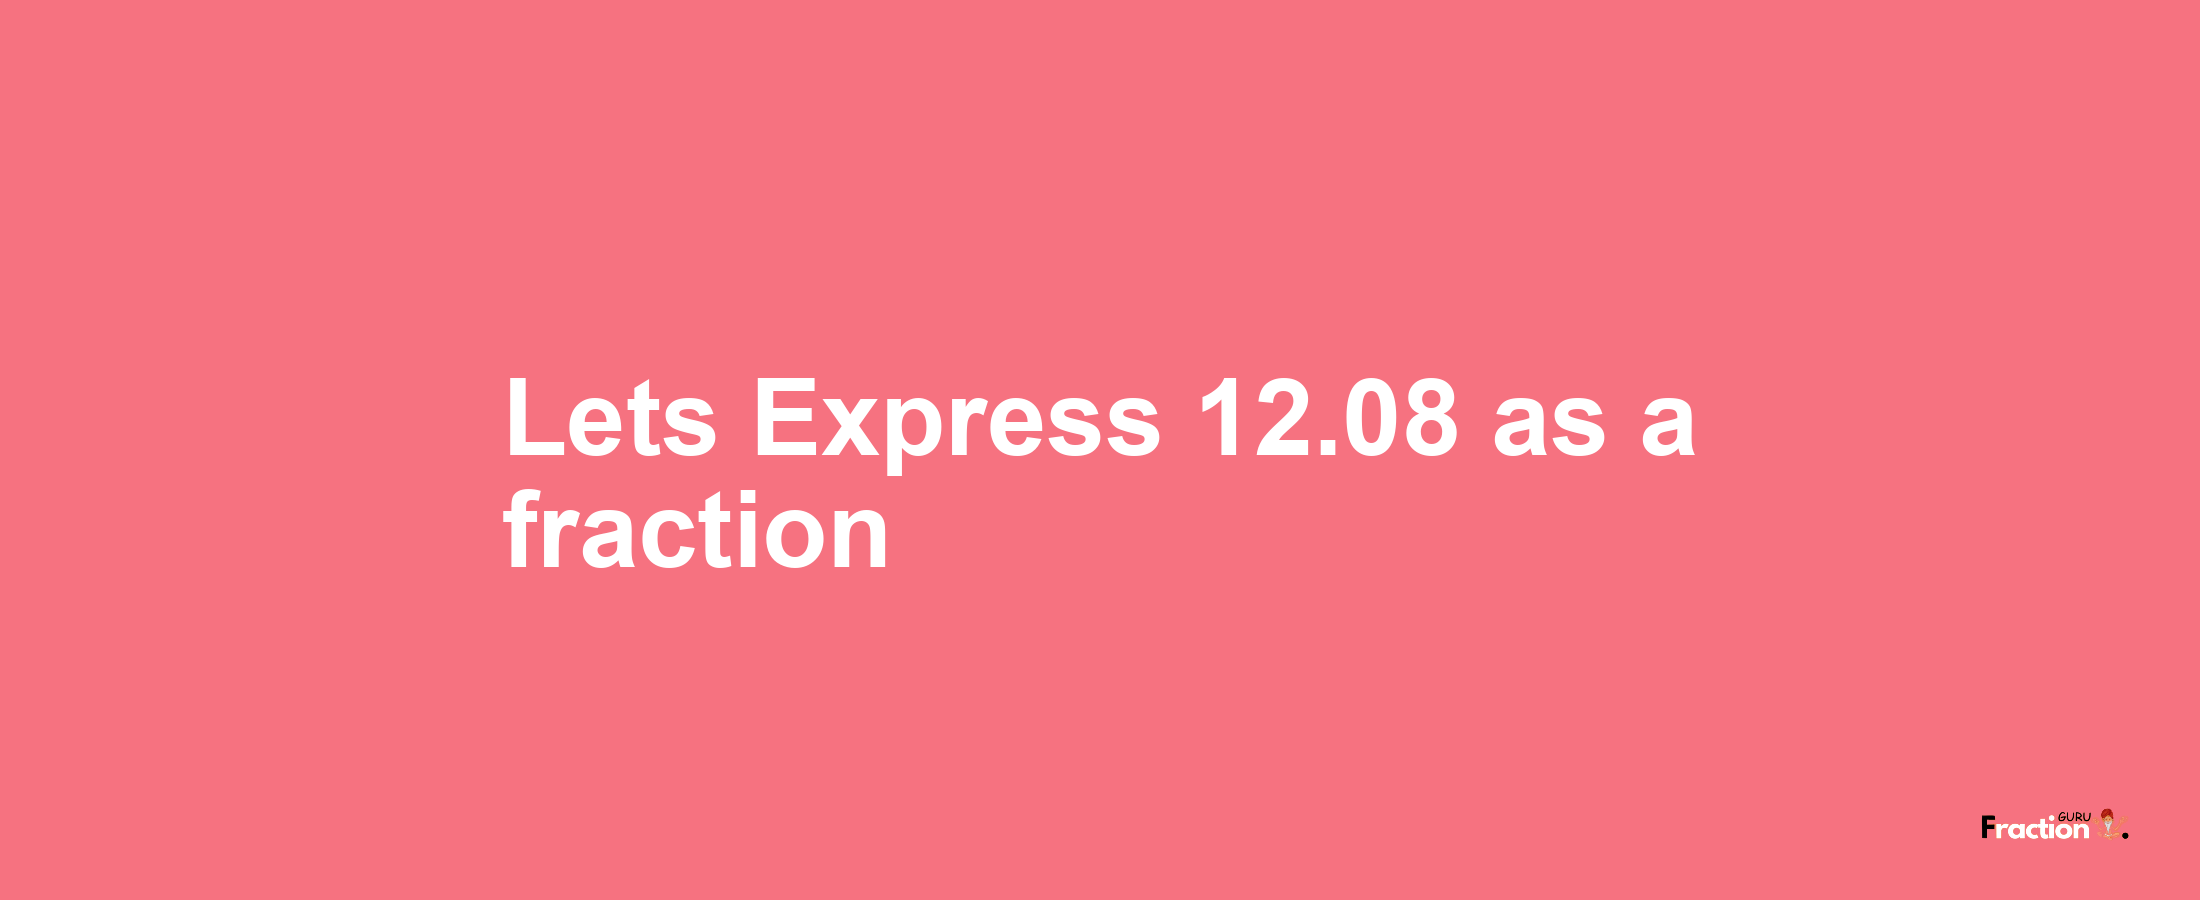 Lets Express 12.08 as afraction